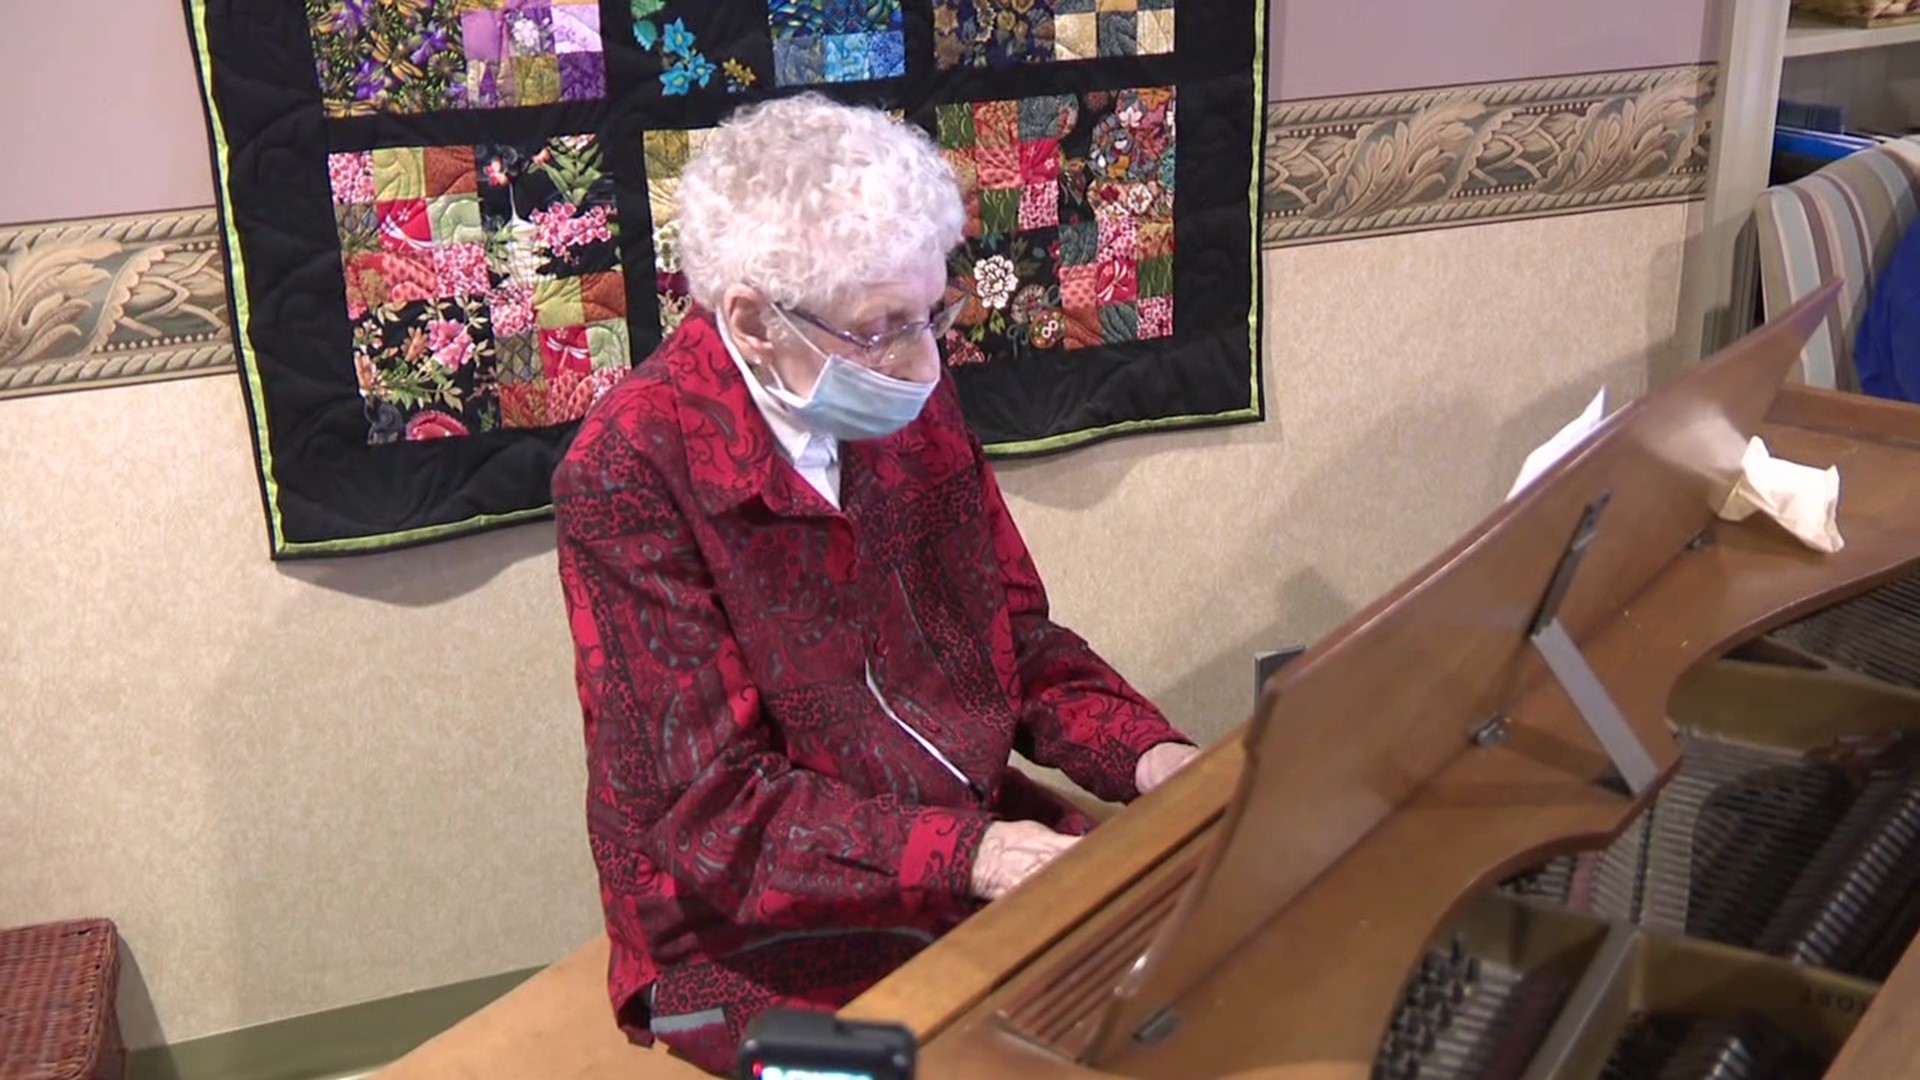 A resident at River View Manor near Lewisburg has brought joy to others during the pandemic through her love of music.